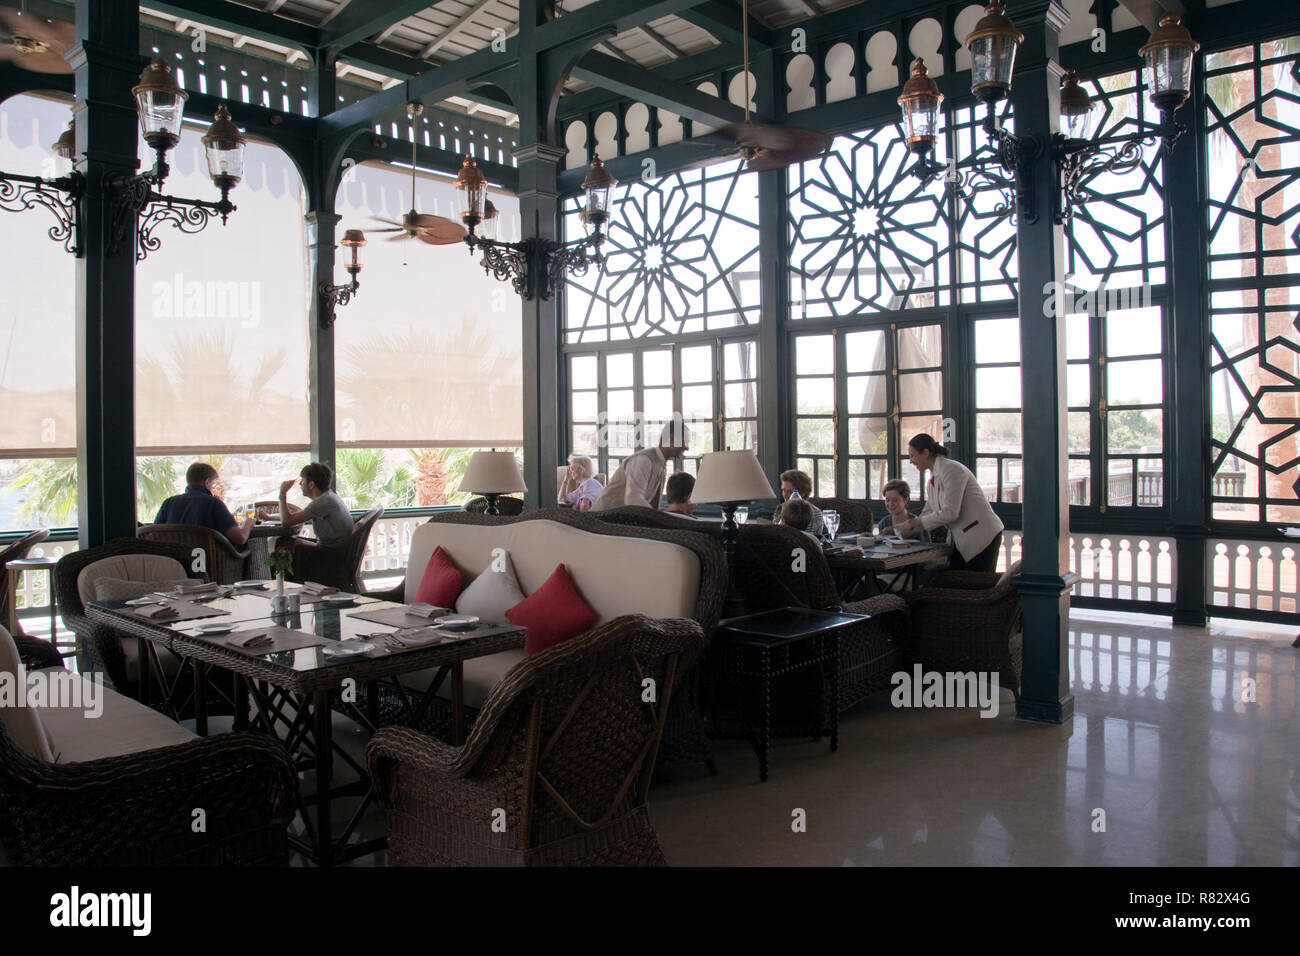 Guests dine on the terrace of the Old Cataract Hotel, an historic British colonial-era hotel that overlooks the Nile, Aswan, Egypt. Stock Photo